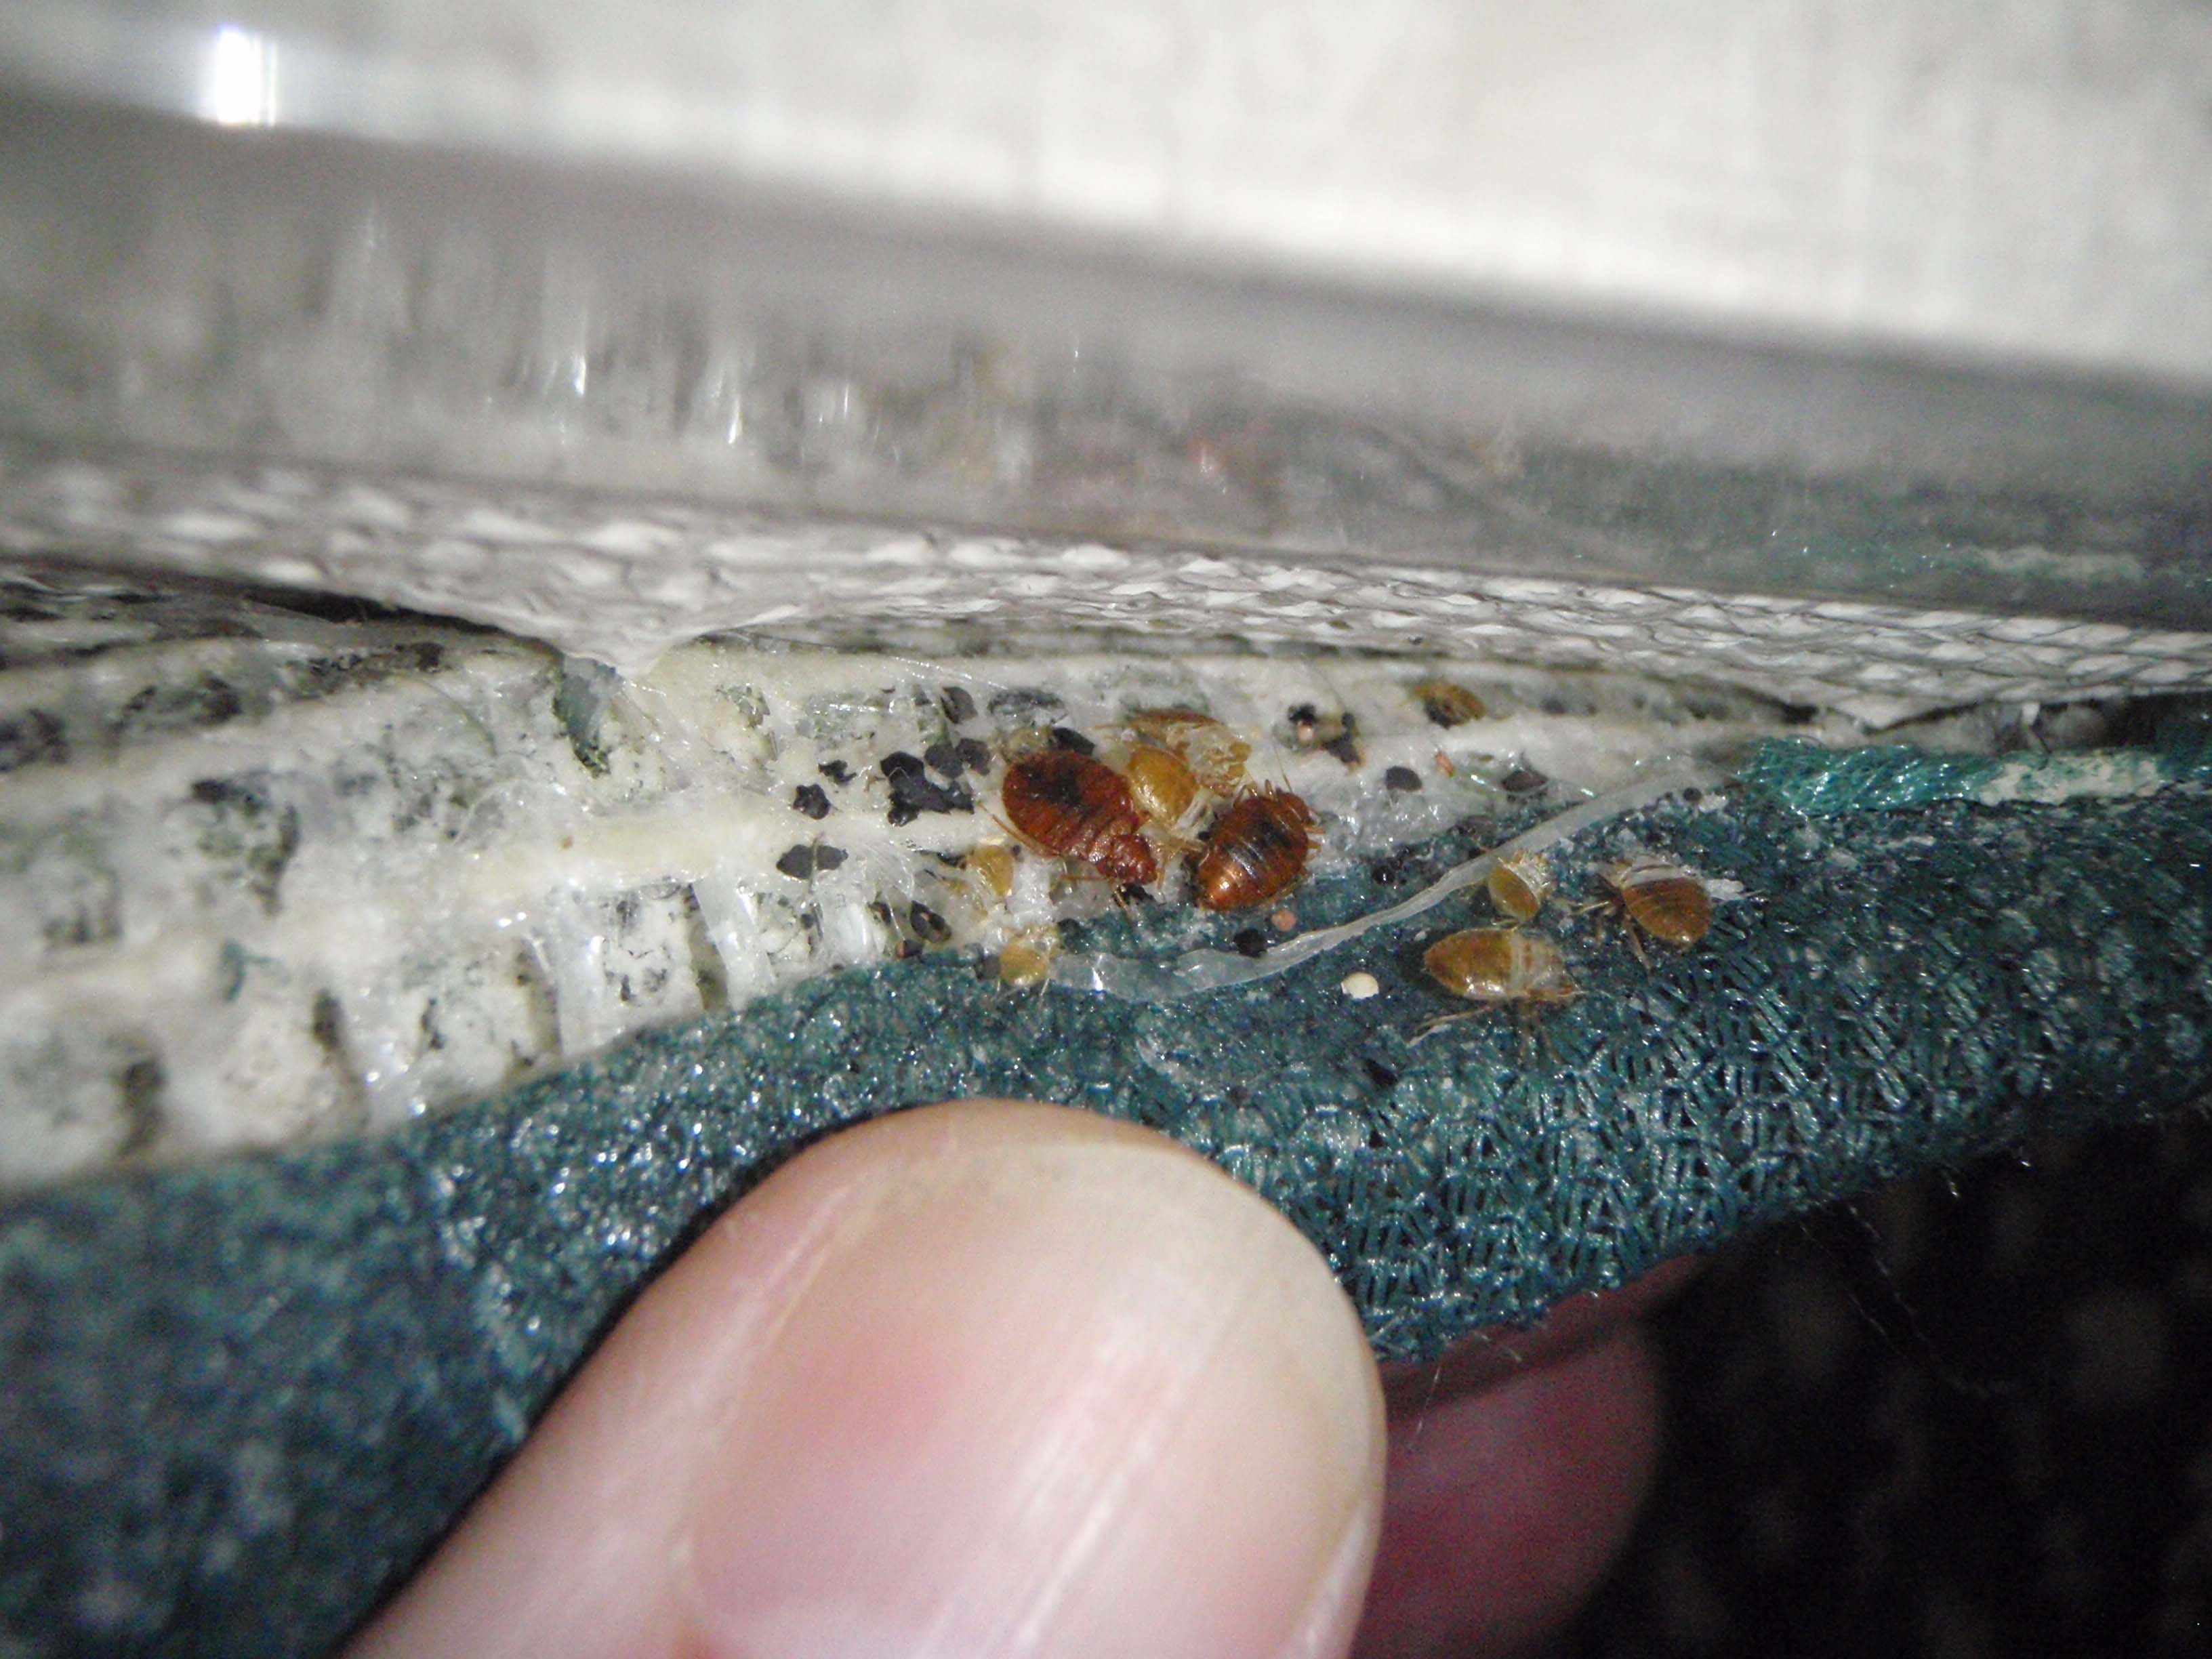 bed bugs found in one area of mattress